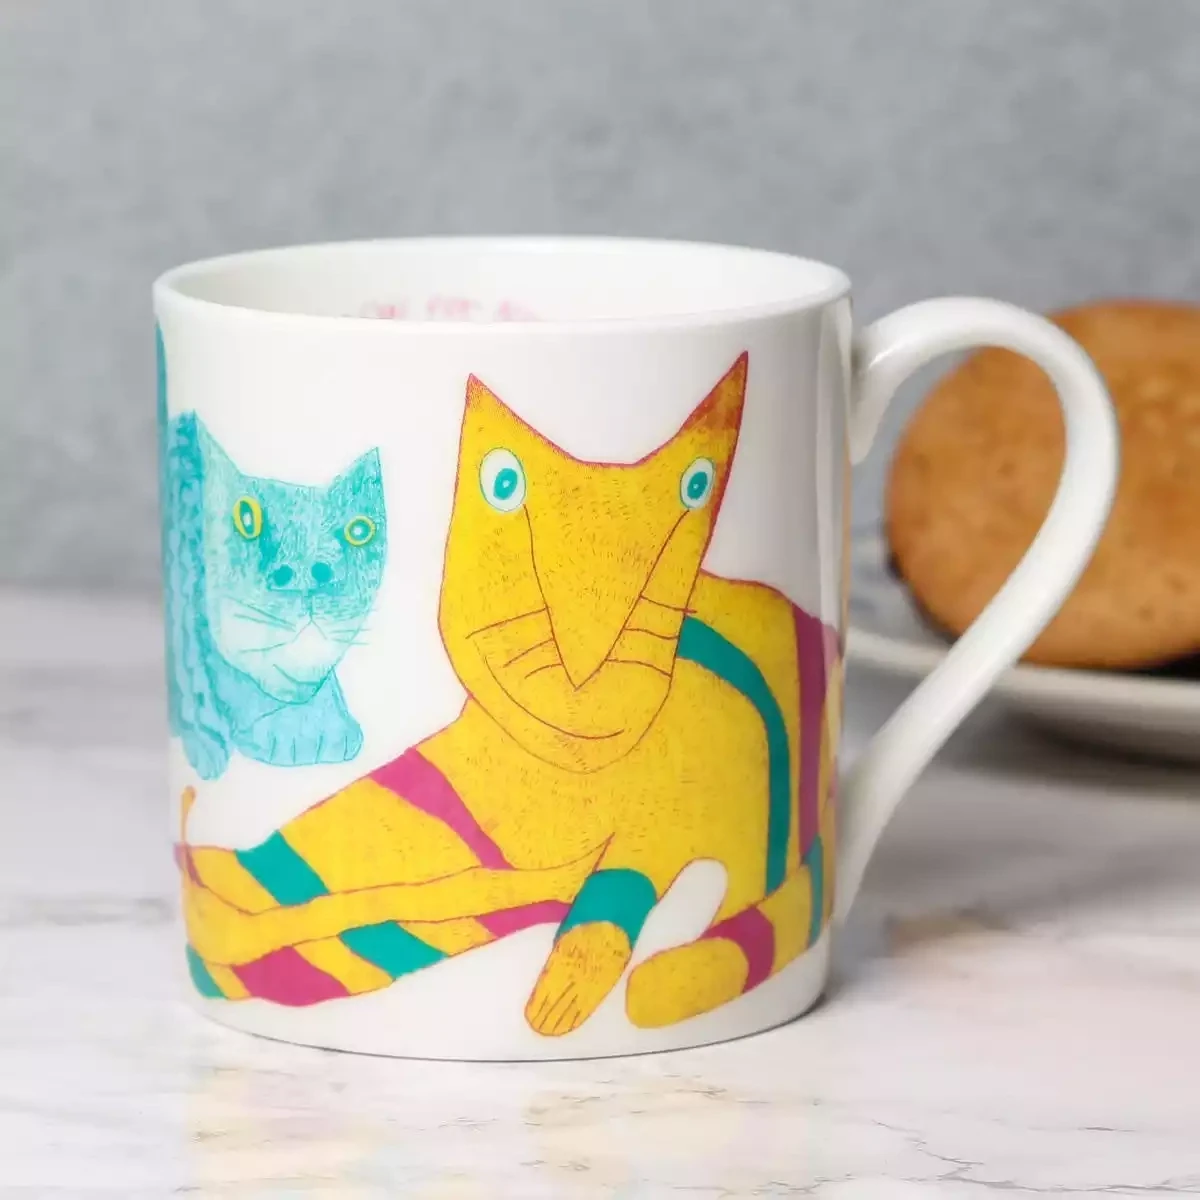 Bone China Mug - Miaow for Now by Arthouse Unlimited